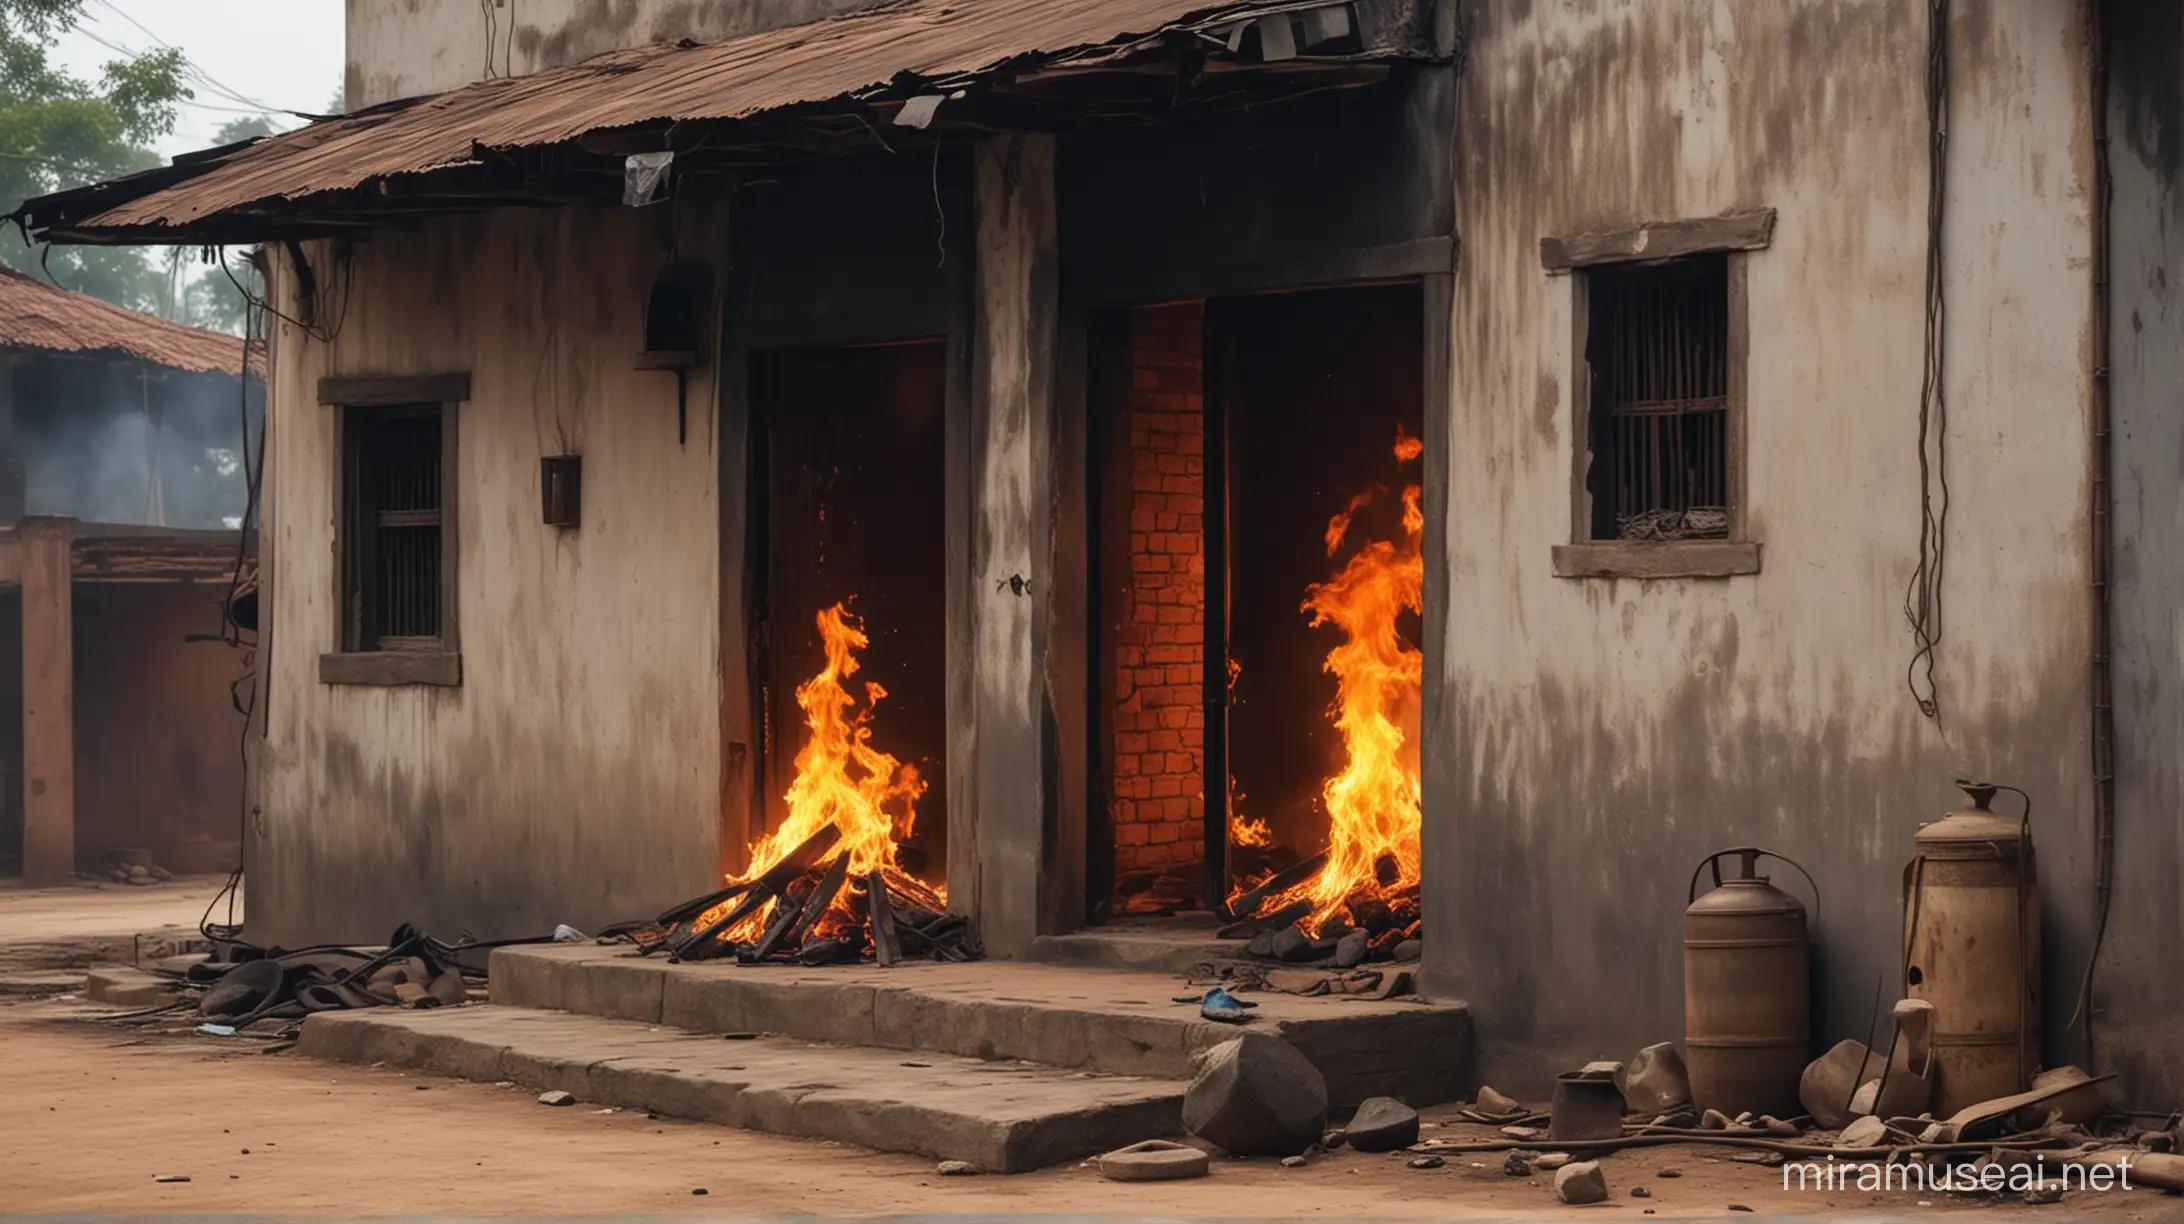 Fire in house, village in india, realistic